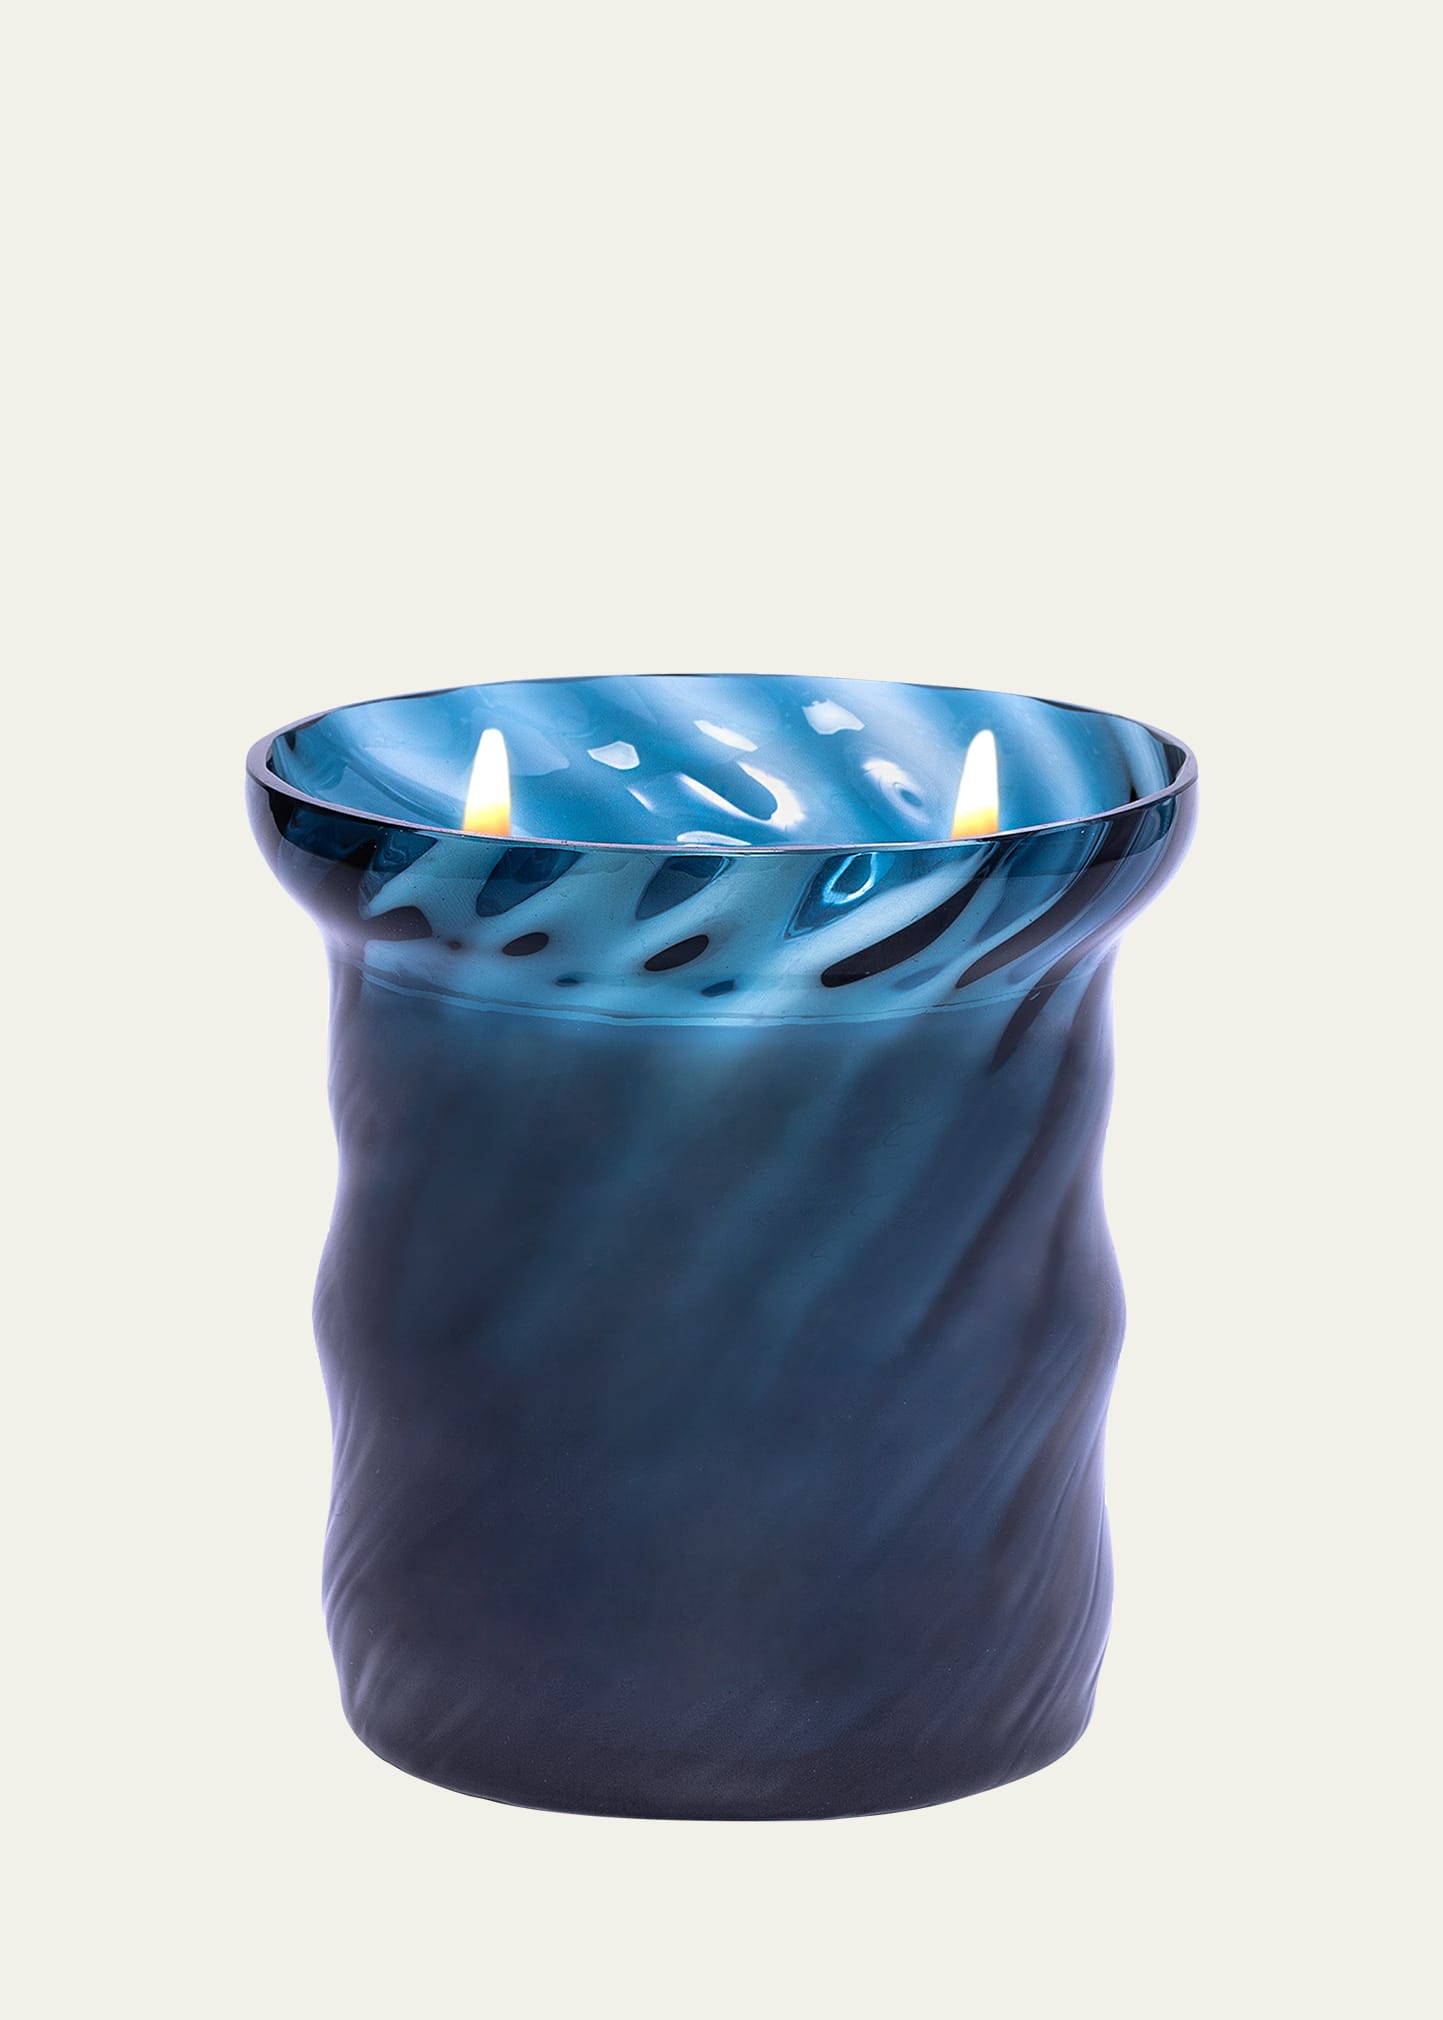 Aina Kari 14 Oz. The First Double-wick Candle - Sweet Cosmopolitan In Blue